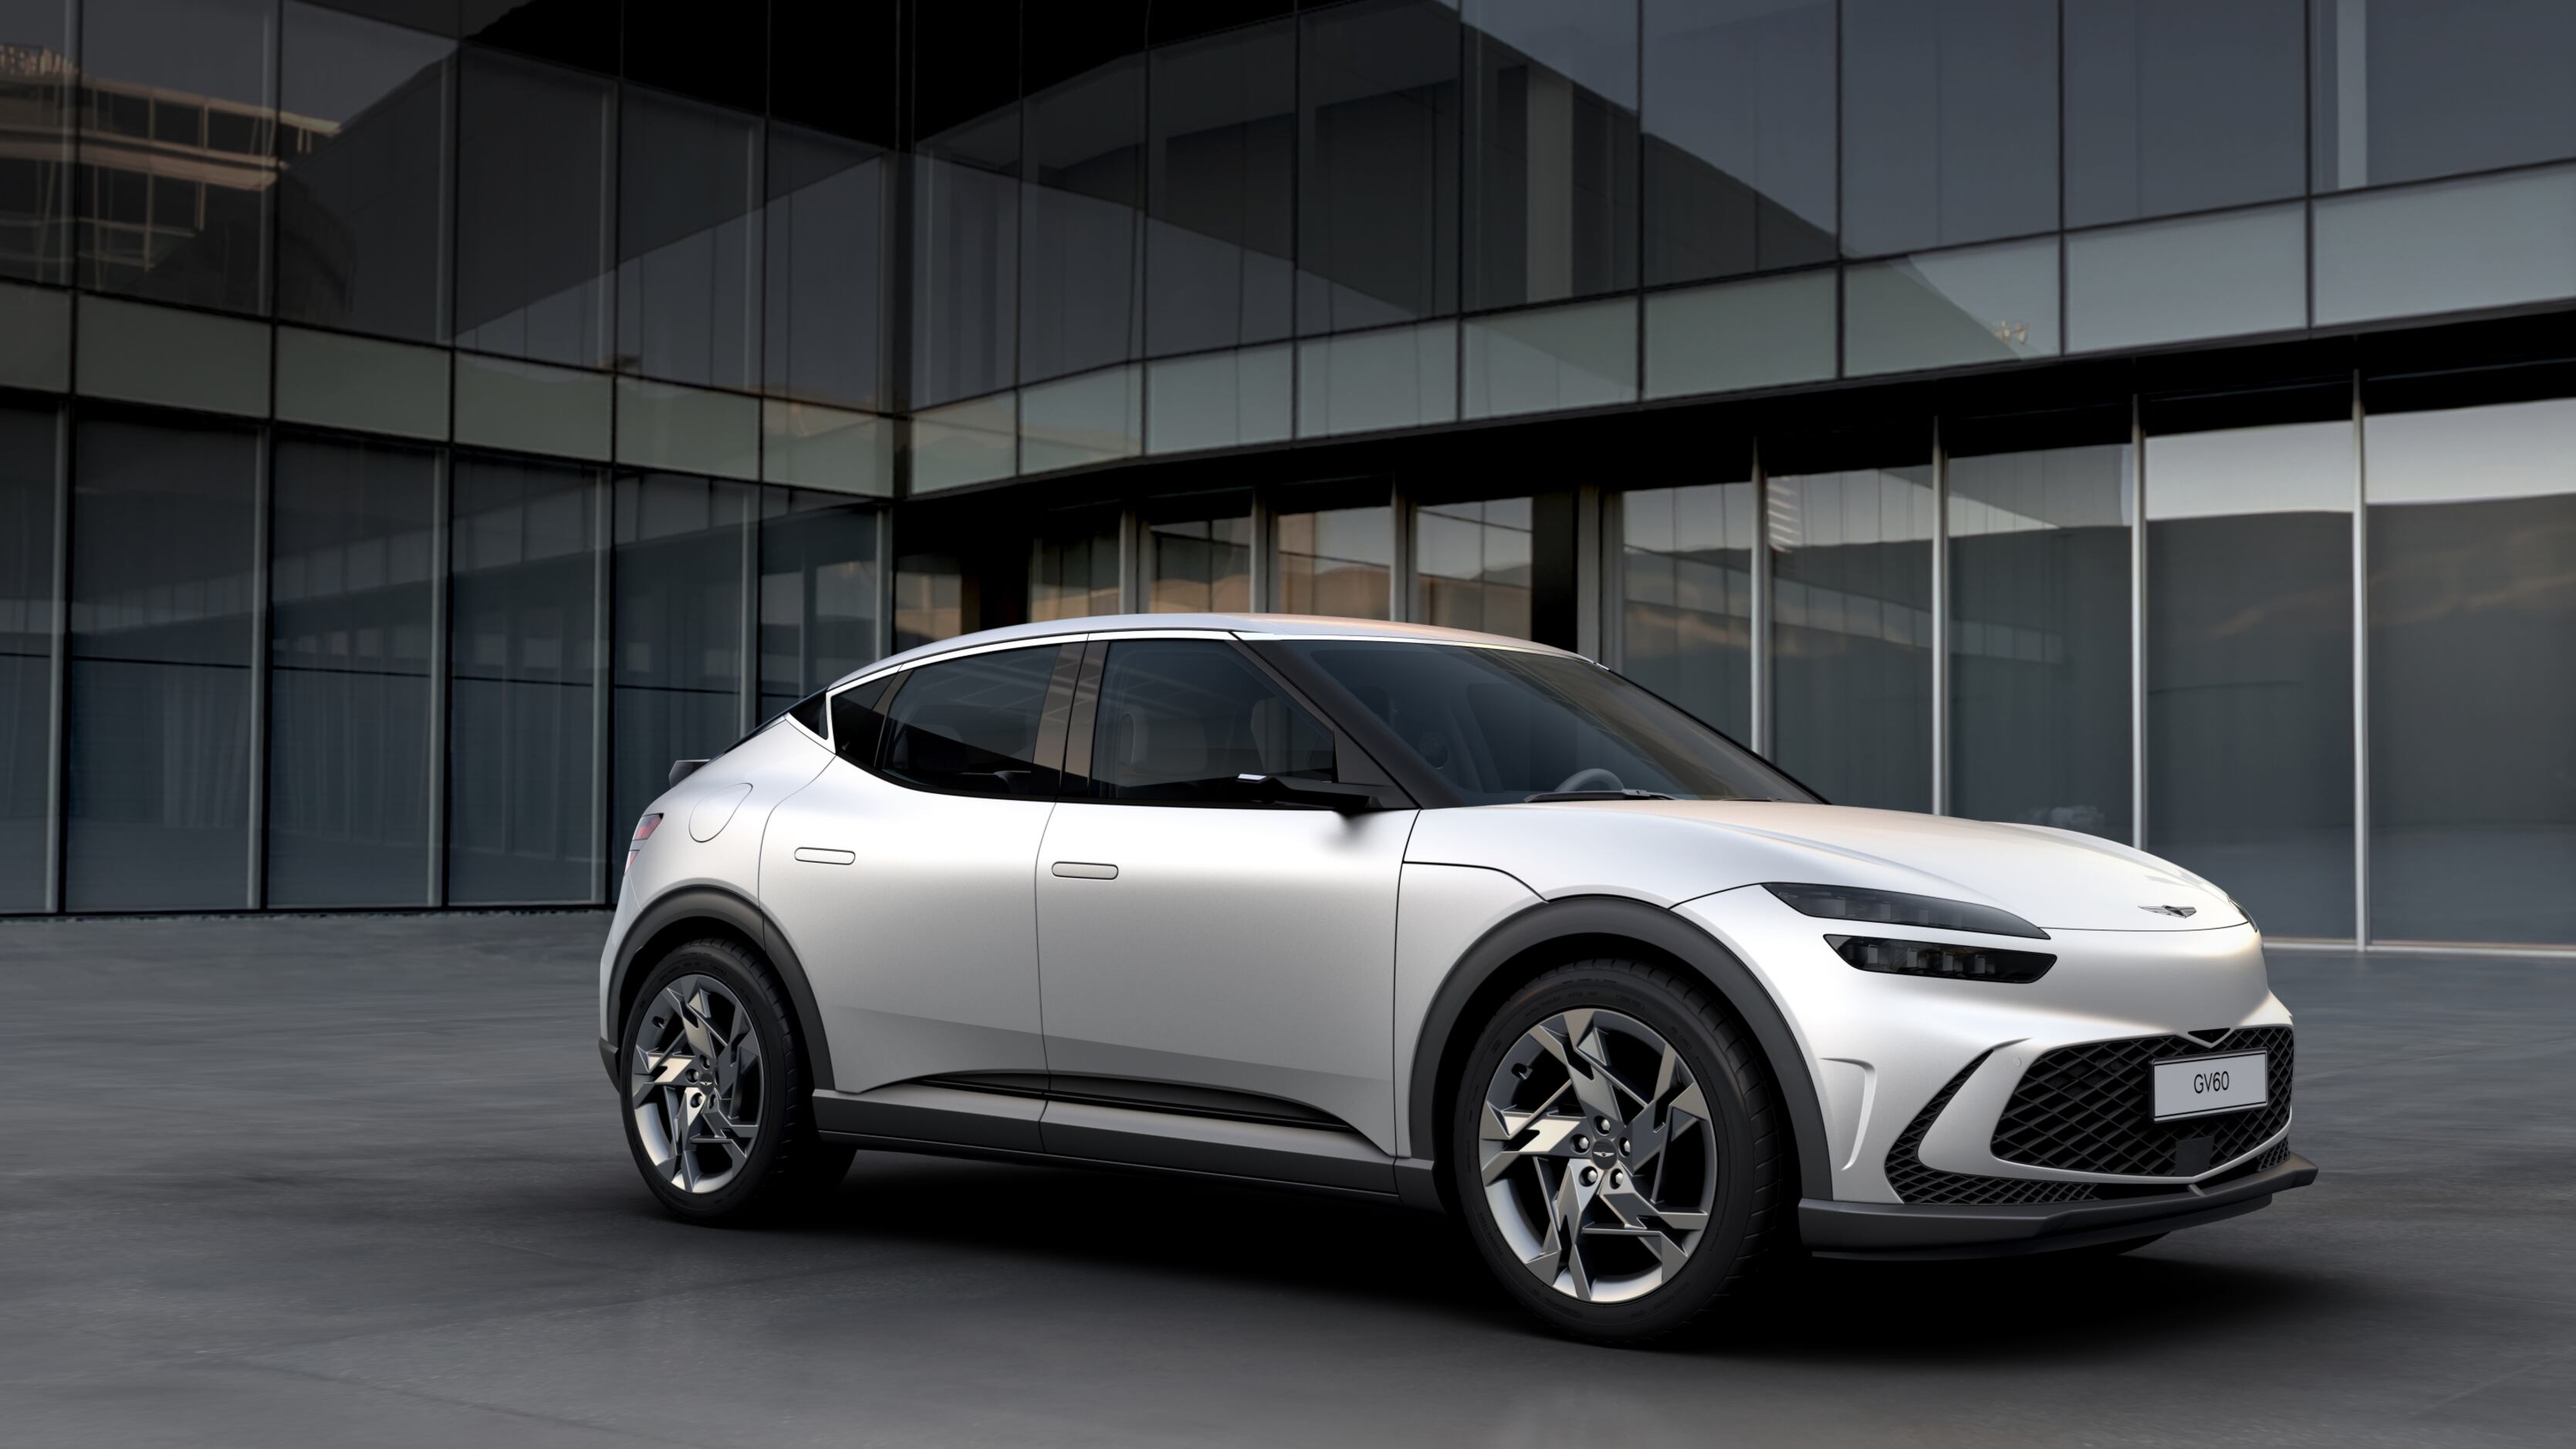 Genesis GV60 is a sci-fi challenger to Tesla, except for the EV